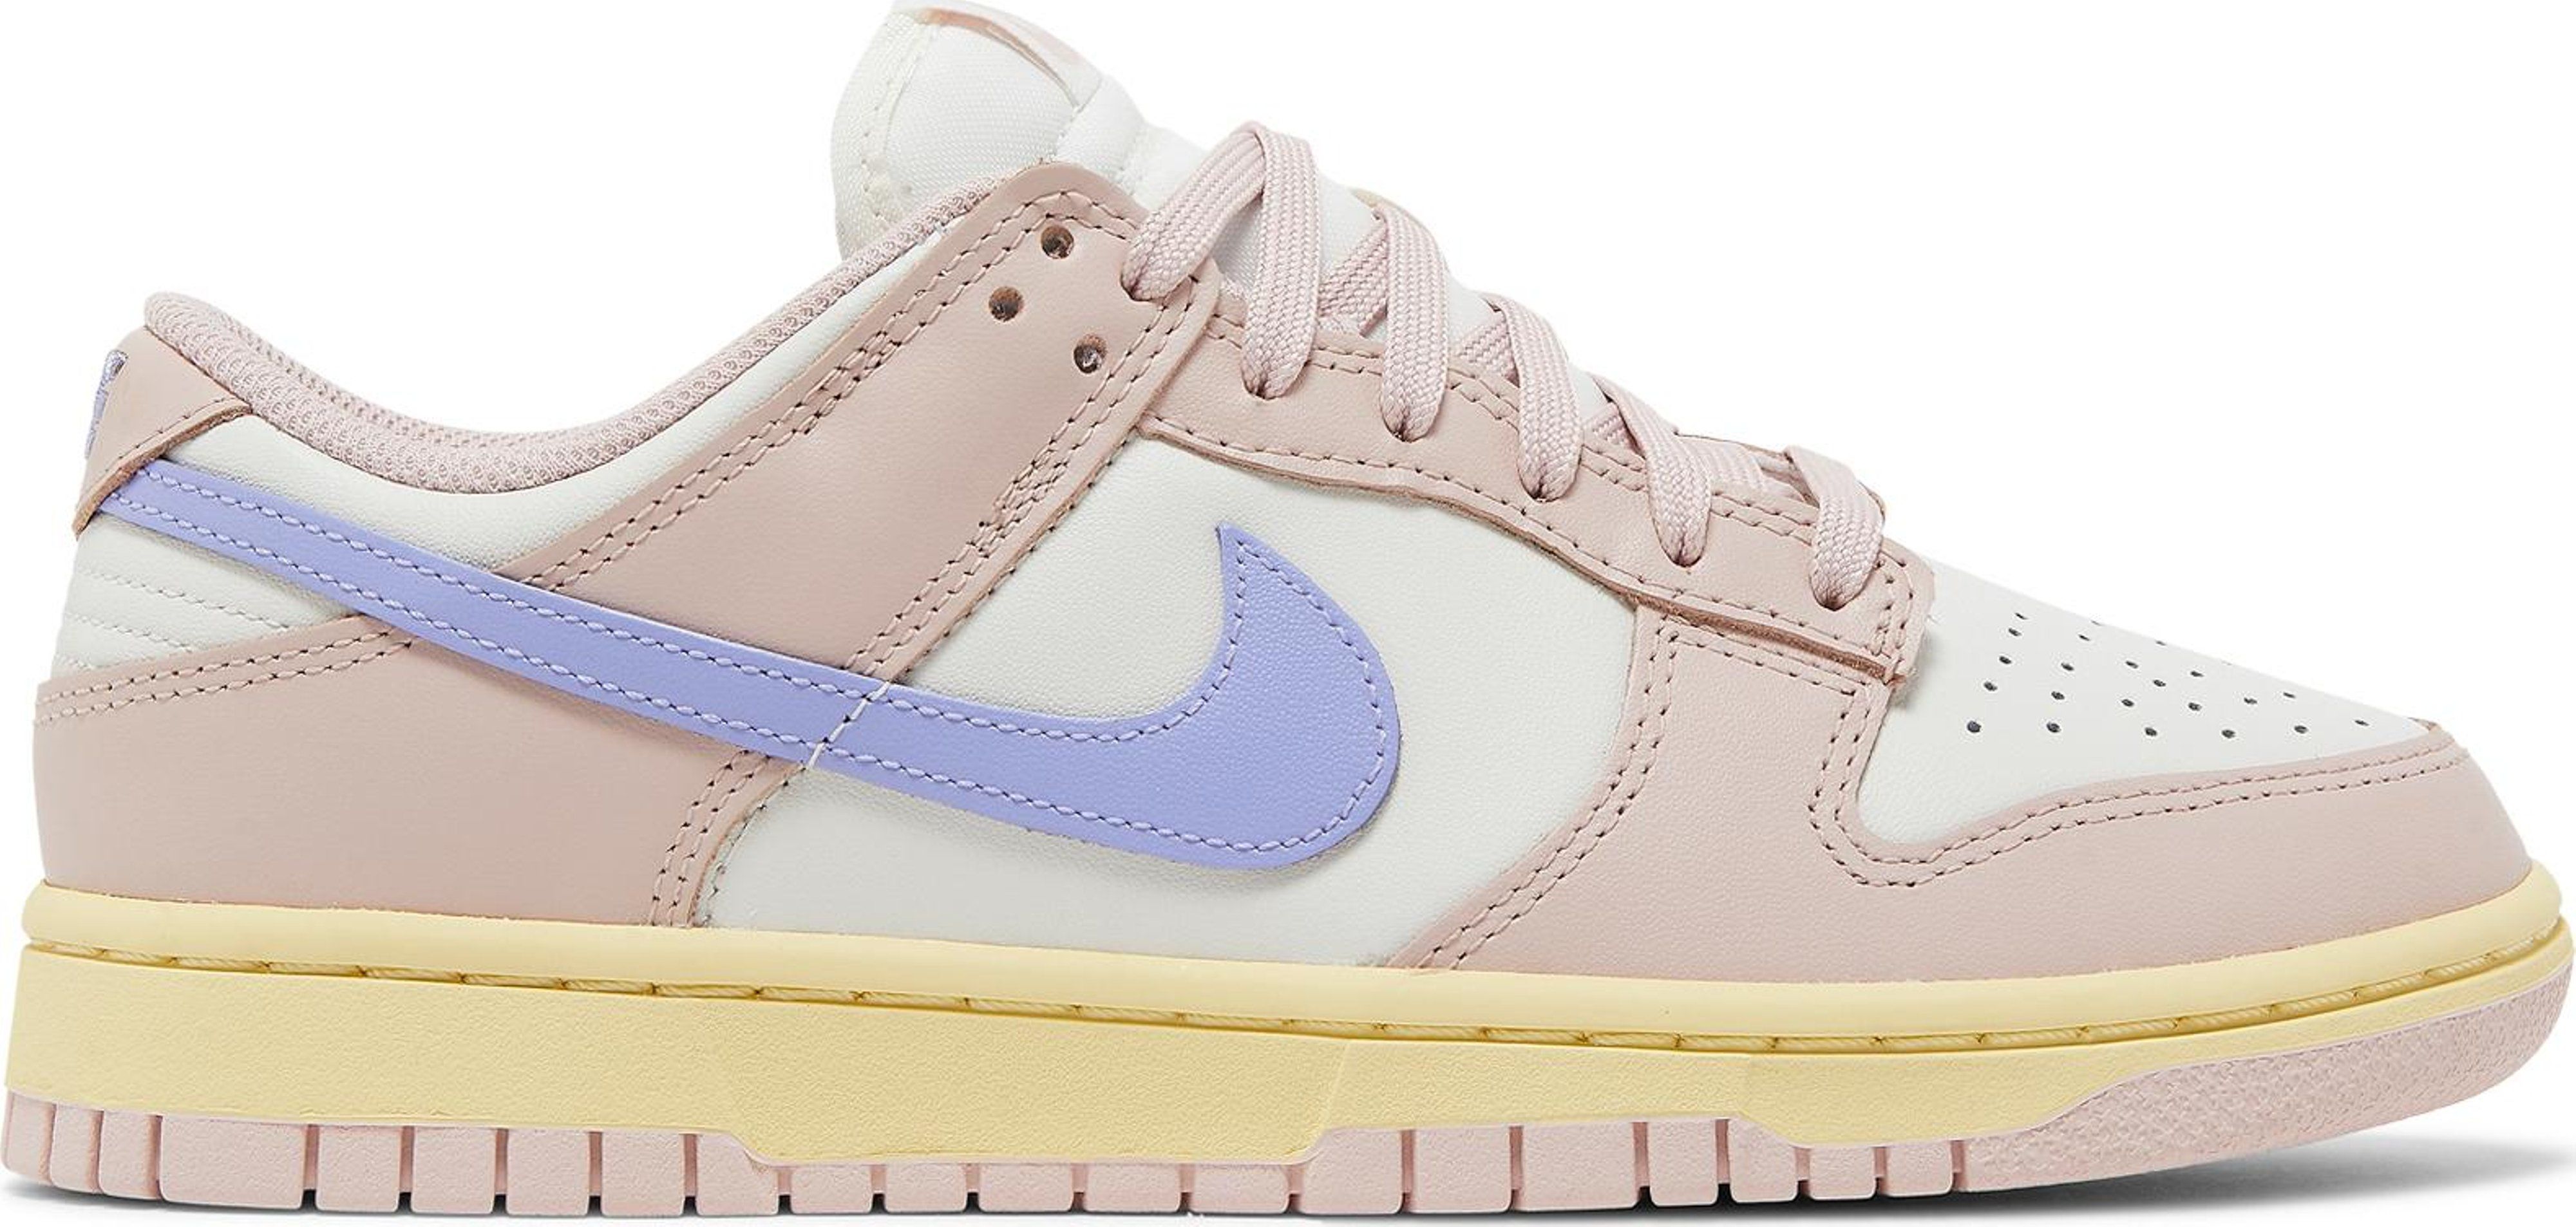 Wmns Dunk Low 'Pink Oxford' | GOAT